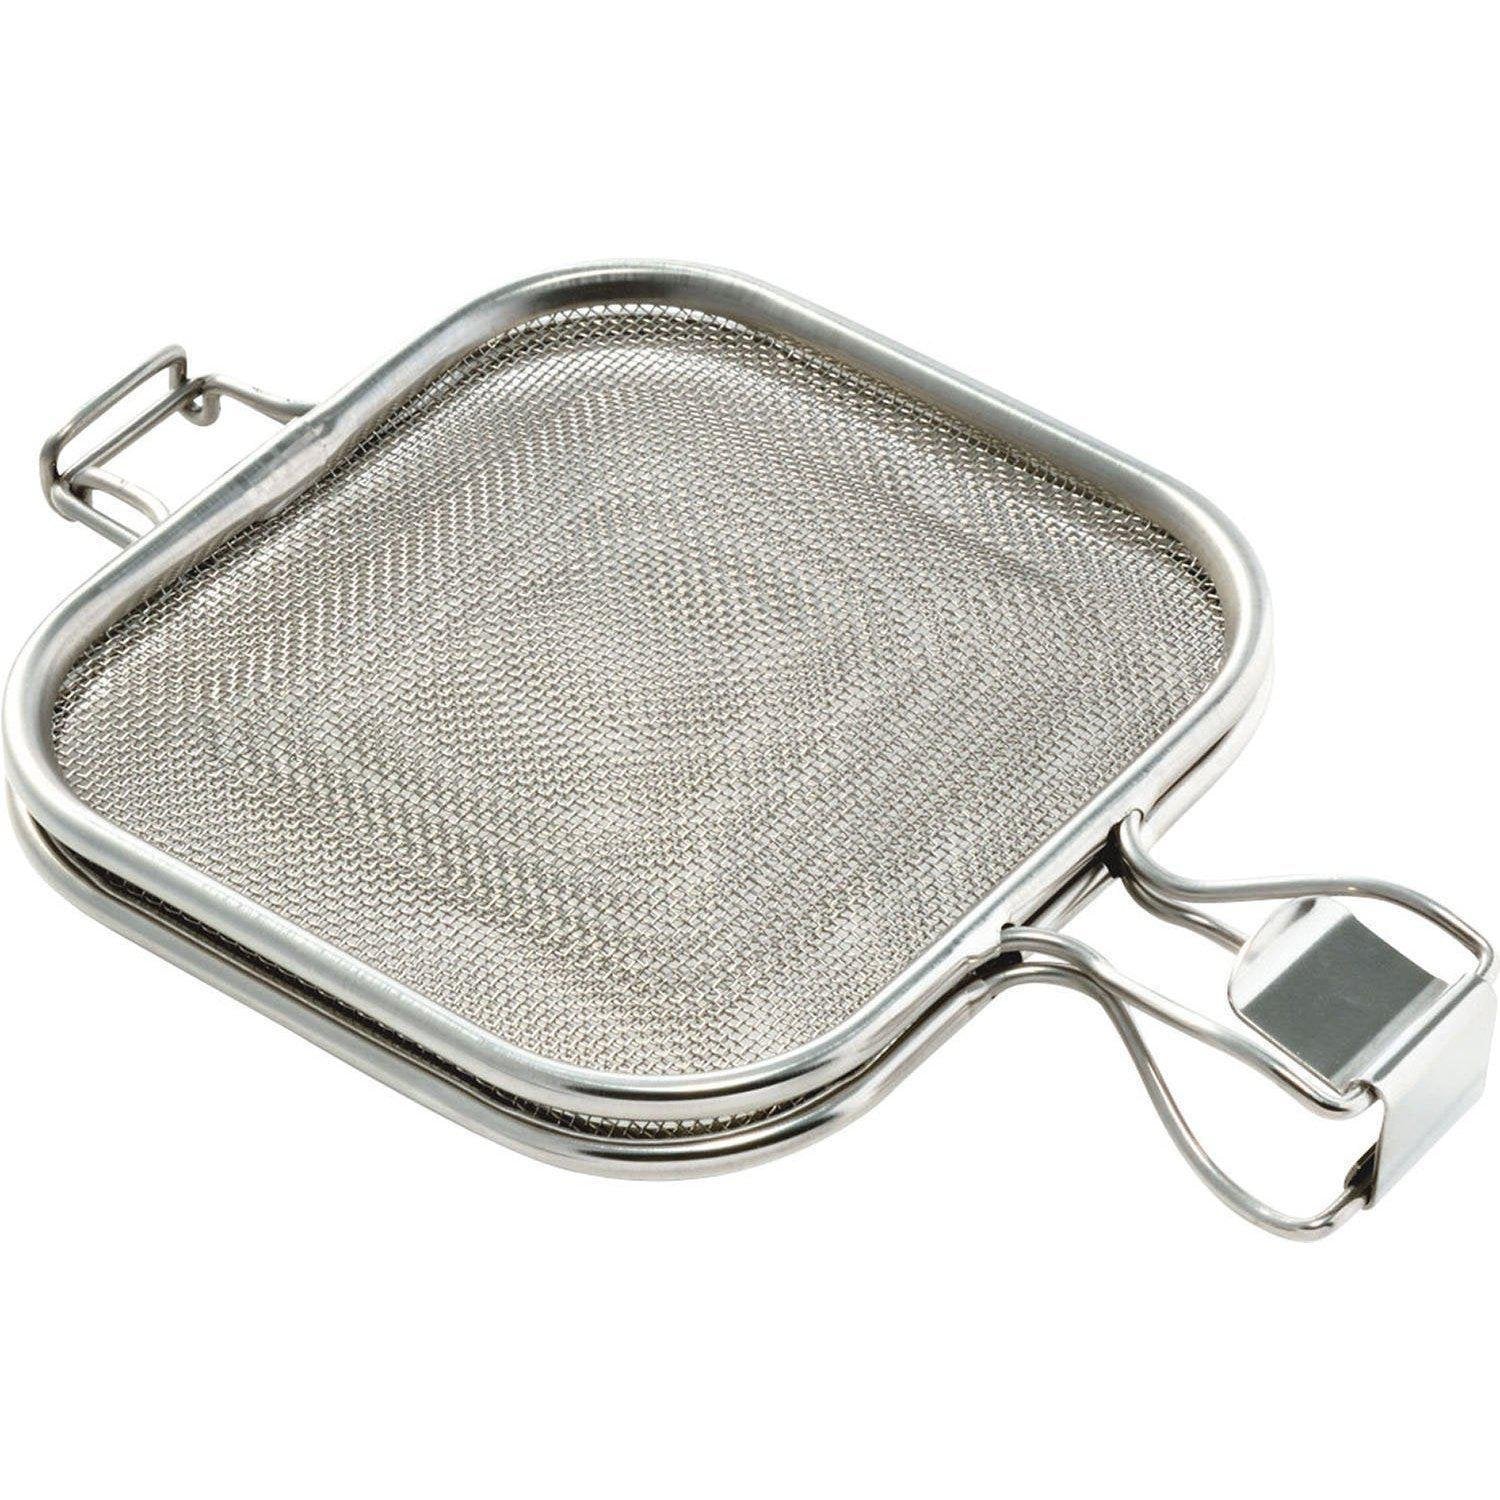 Leye Grill Hot Sand Maker Stainless Steel Mesh LS1515